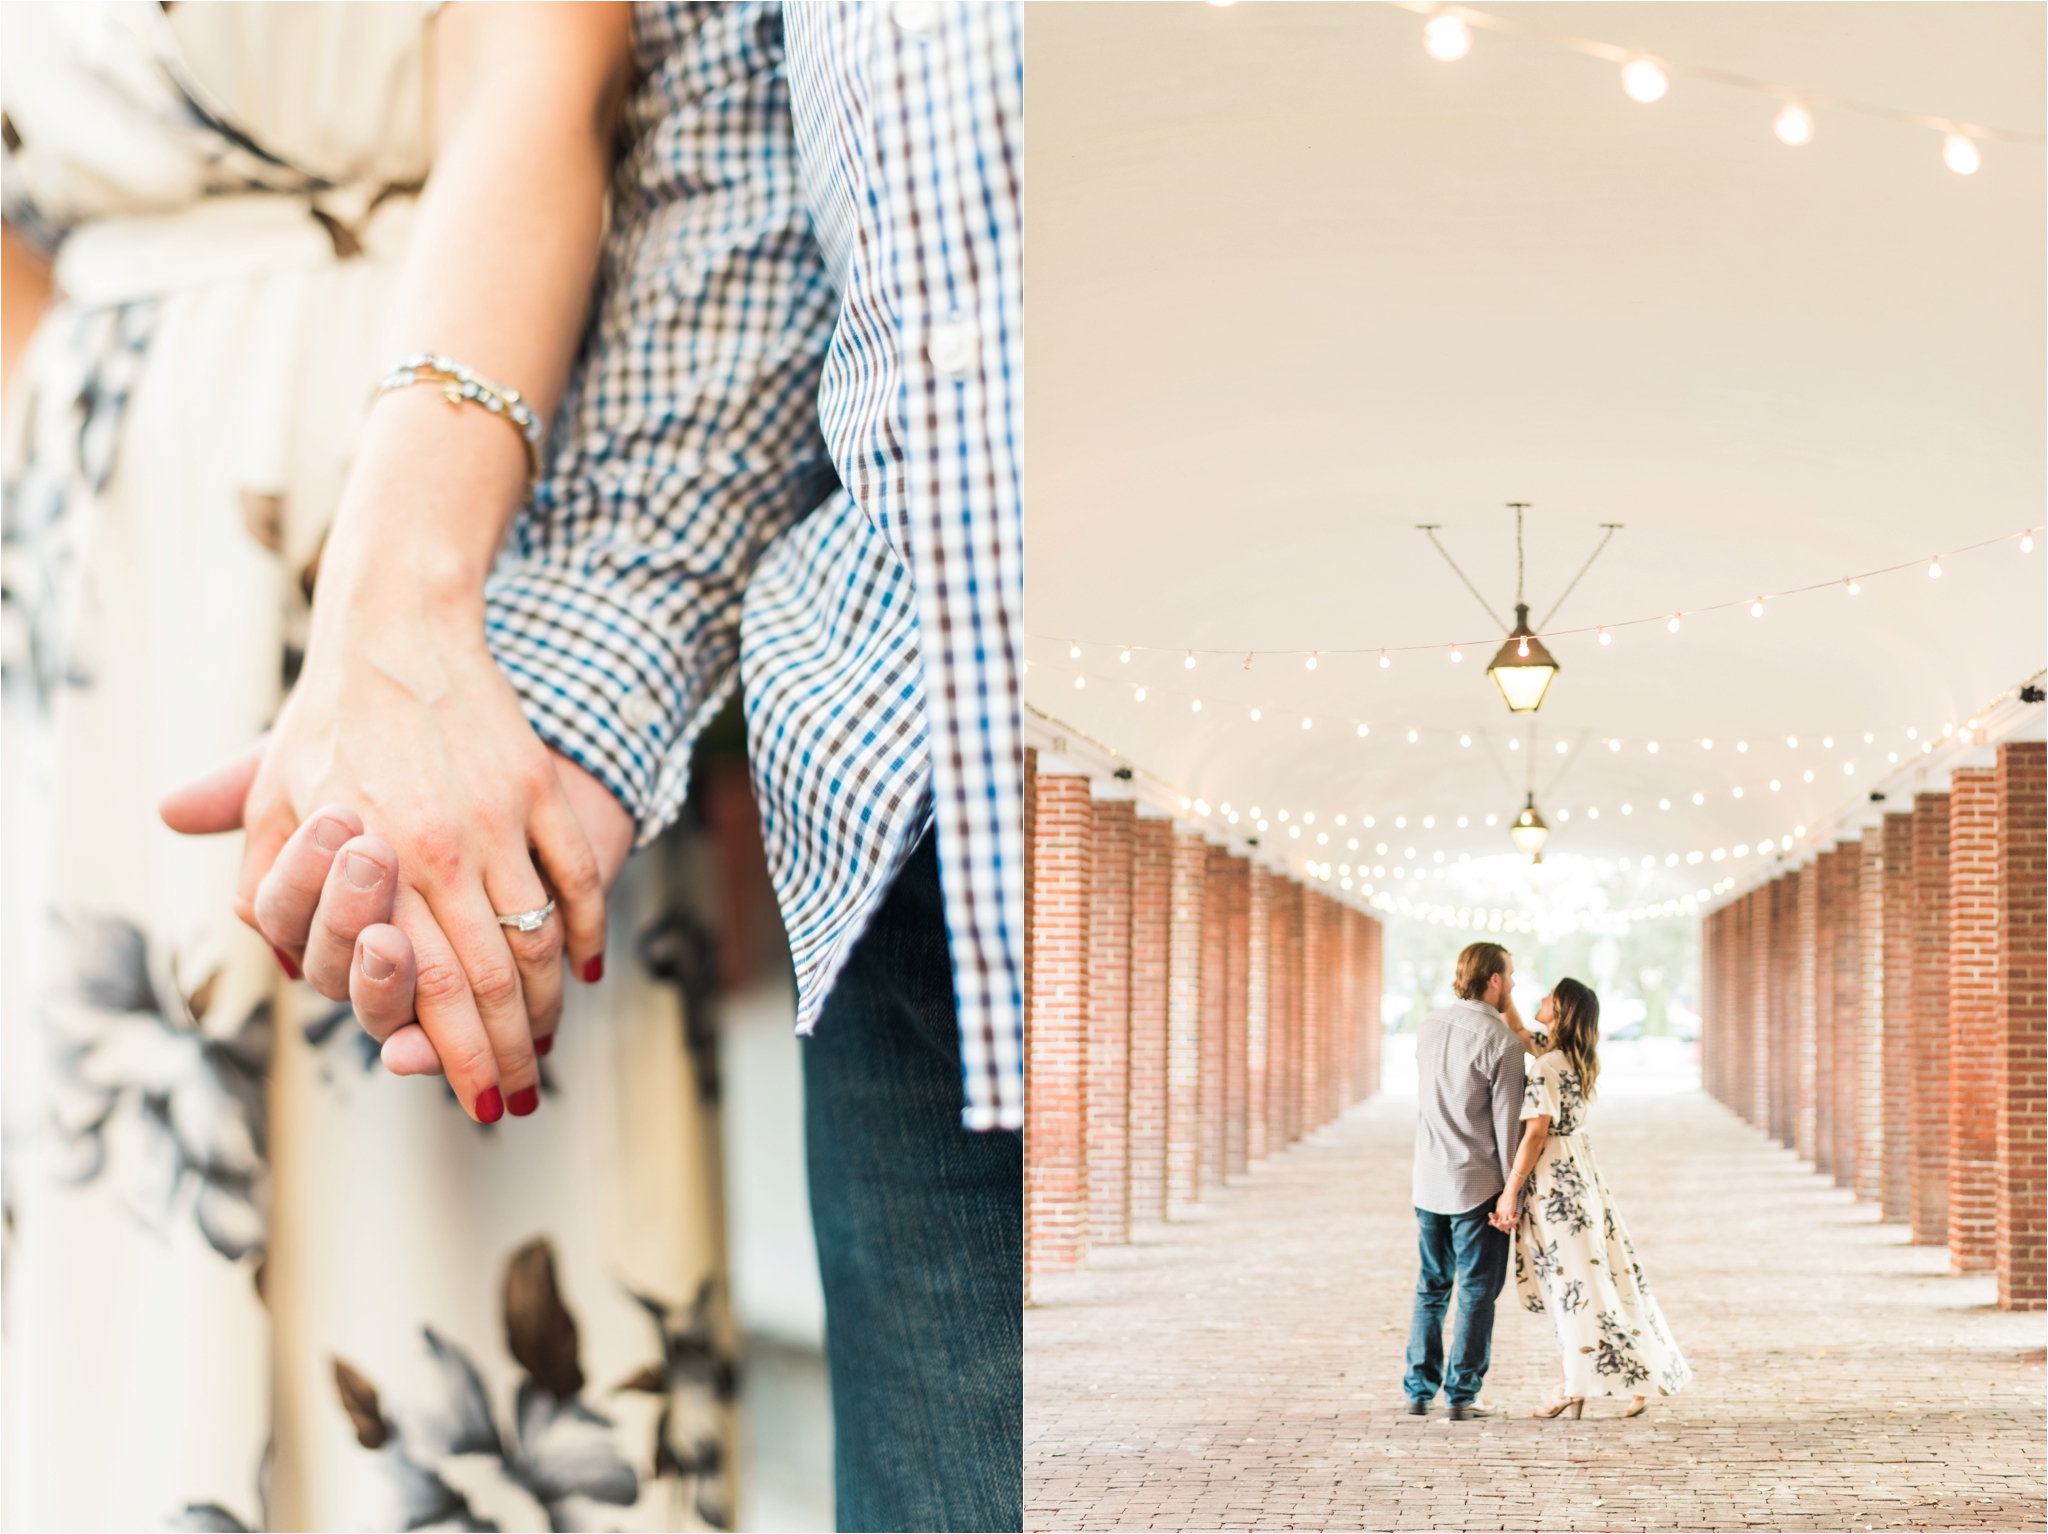 Headhouse Square Philadelphia Engagements by Hillary Muelleck Photography // hillarymuelleck.com